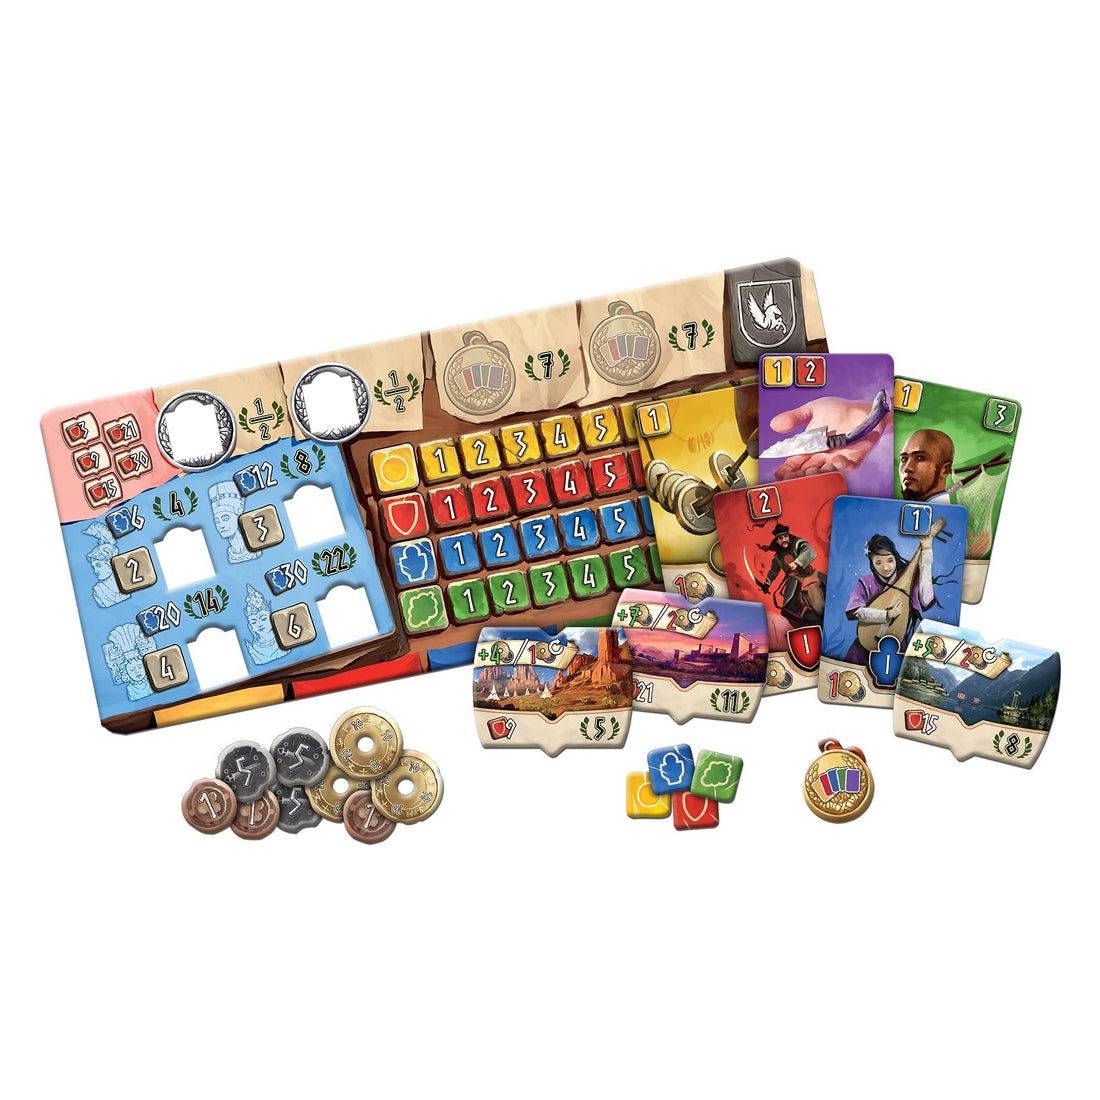 Shop The Game Of Life online